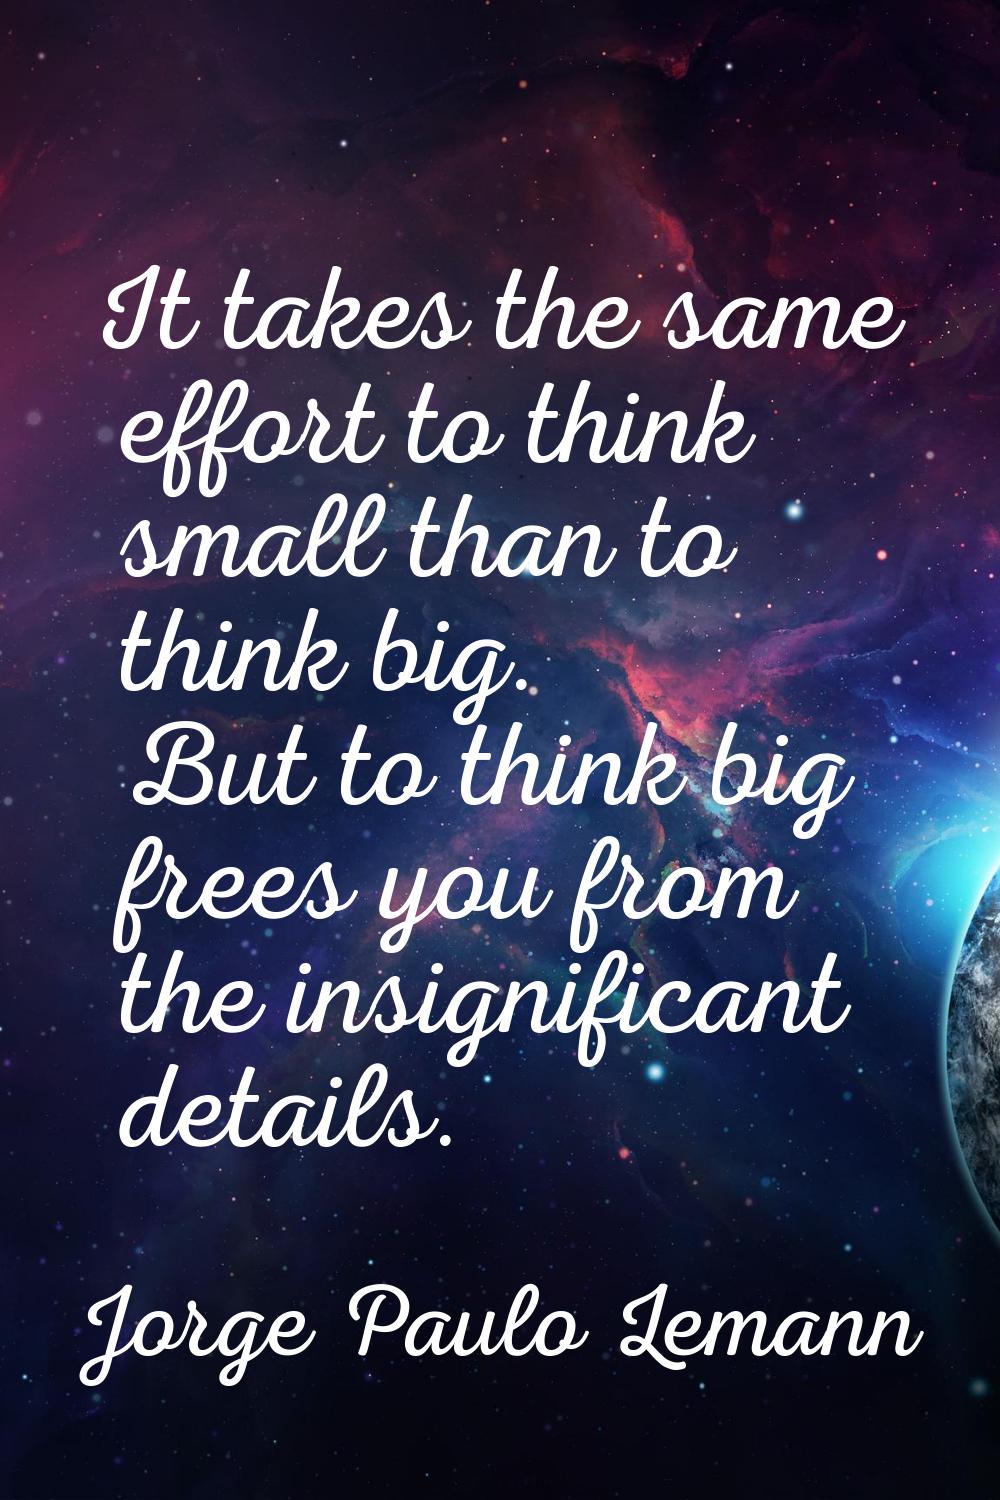 It takes the same effort to think small than to think big. But to think big frees you from the insi